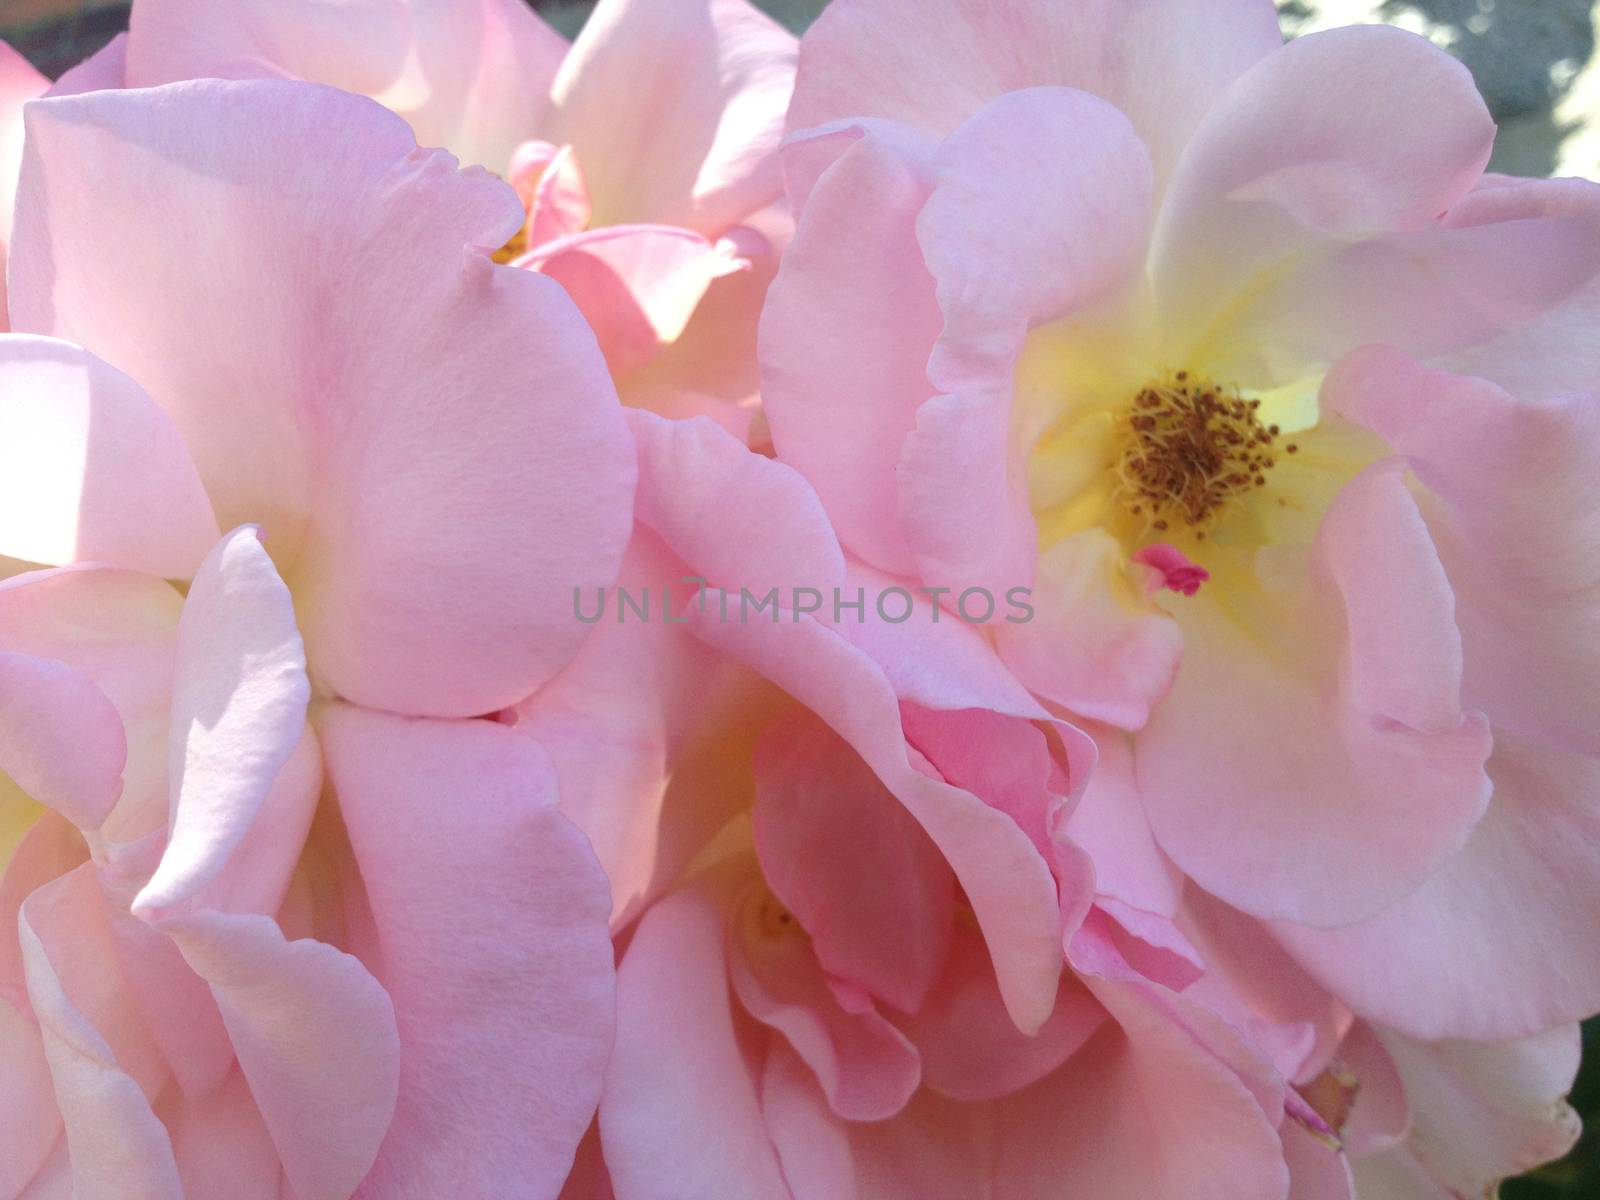 Puffy pink roses with yellow middles in nature